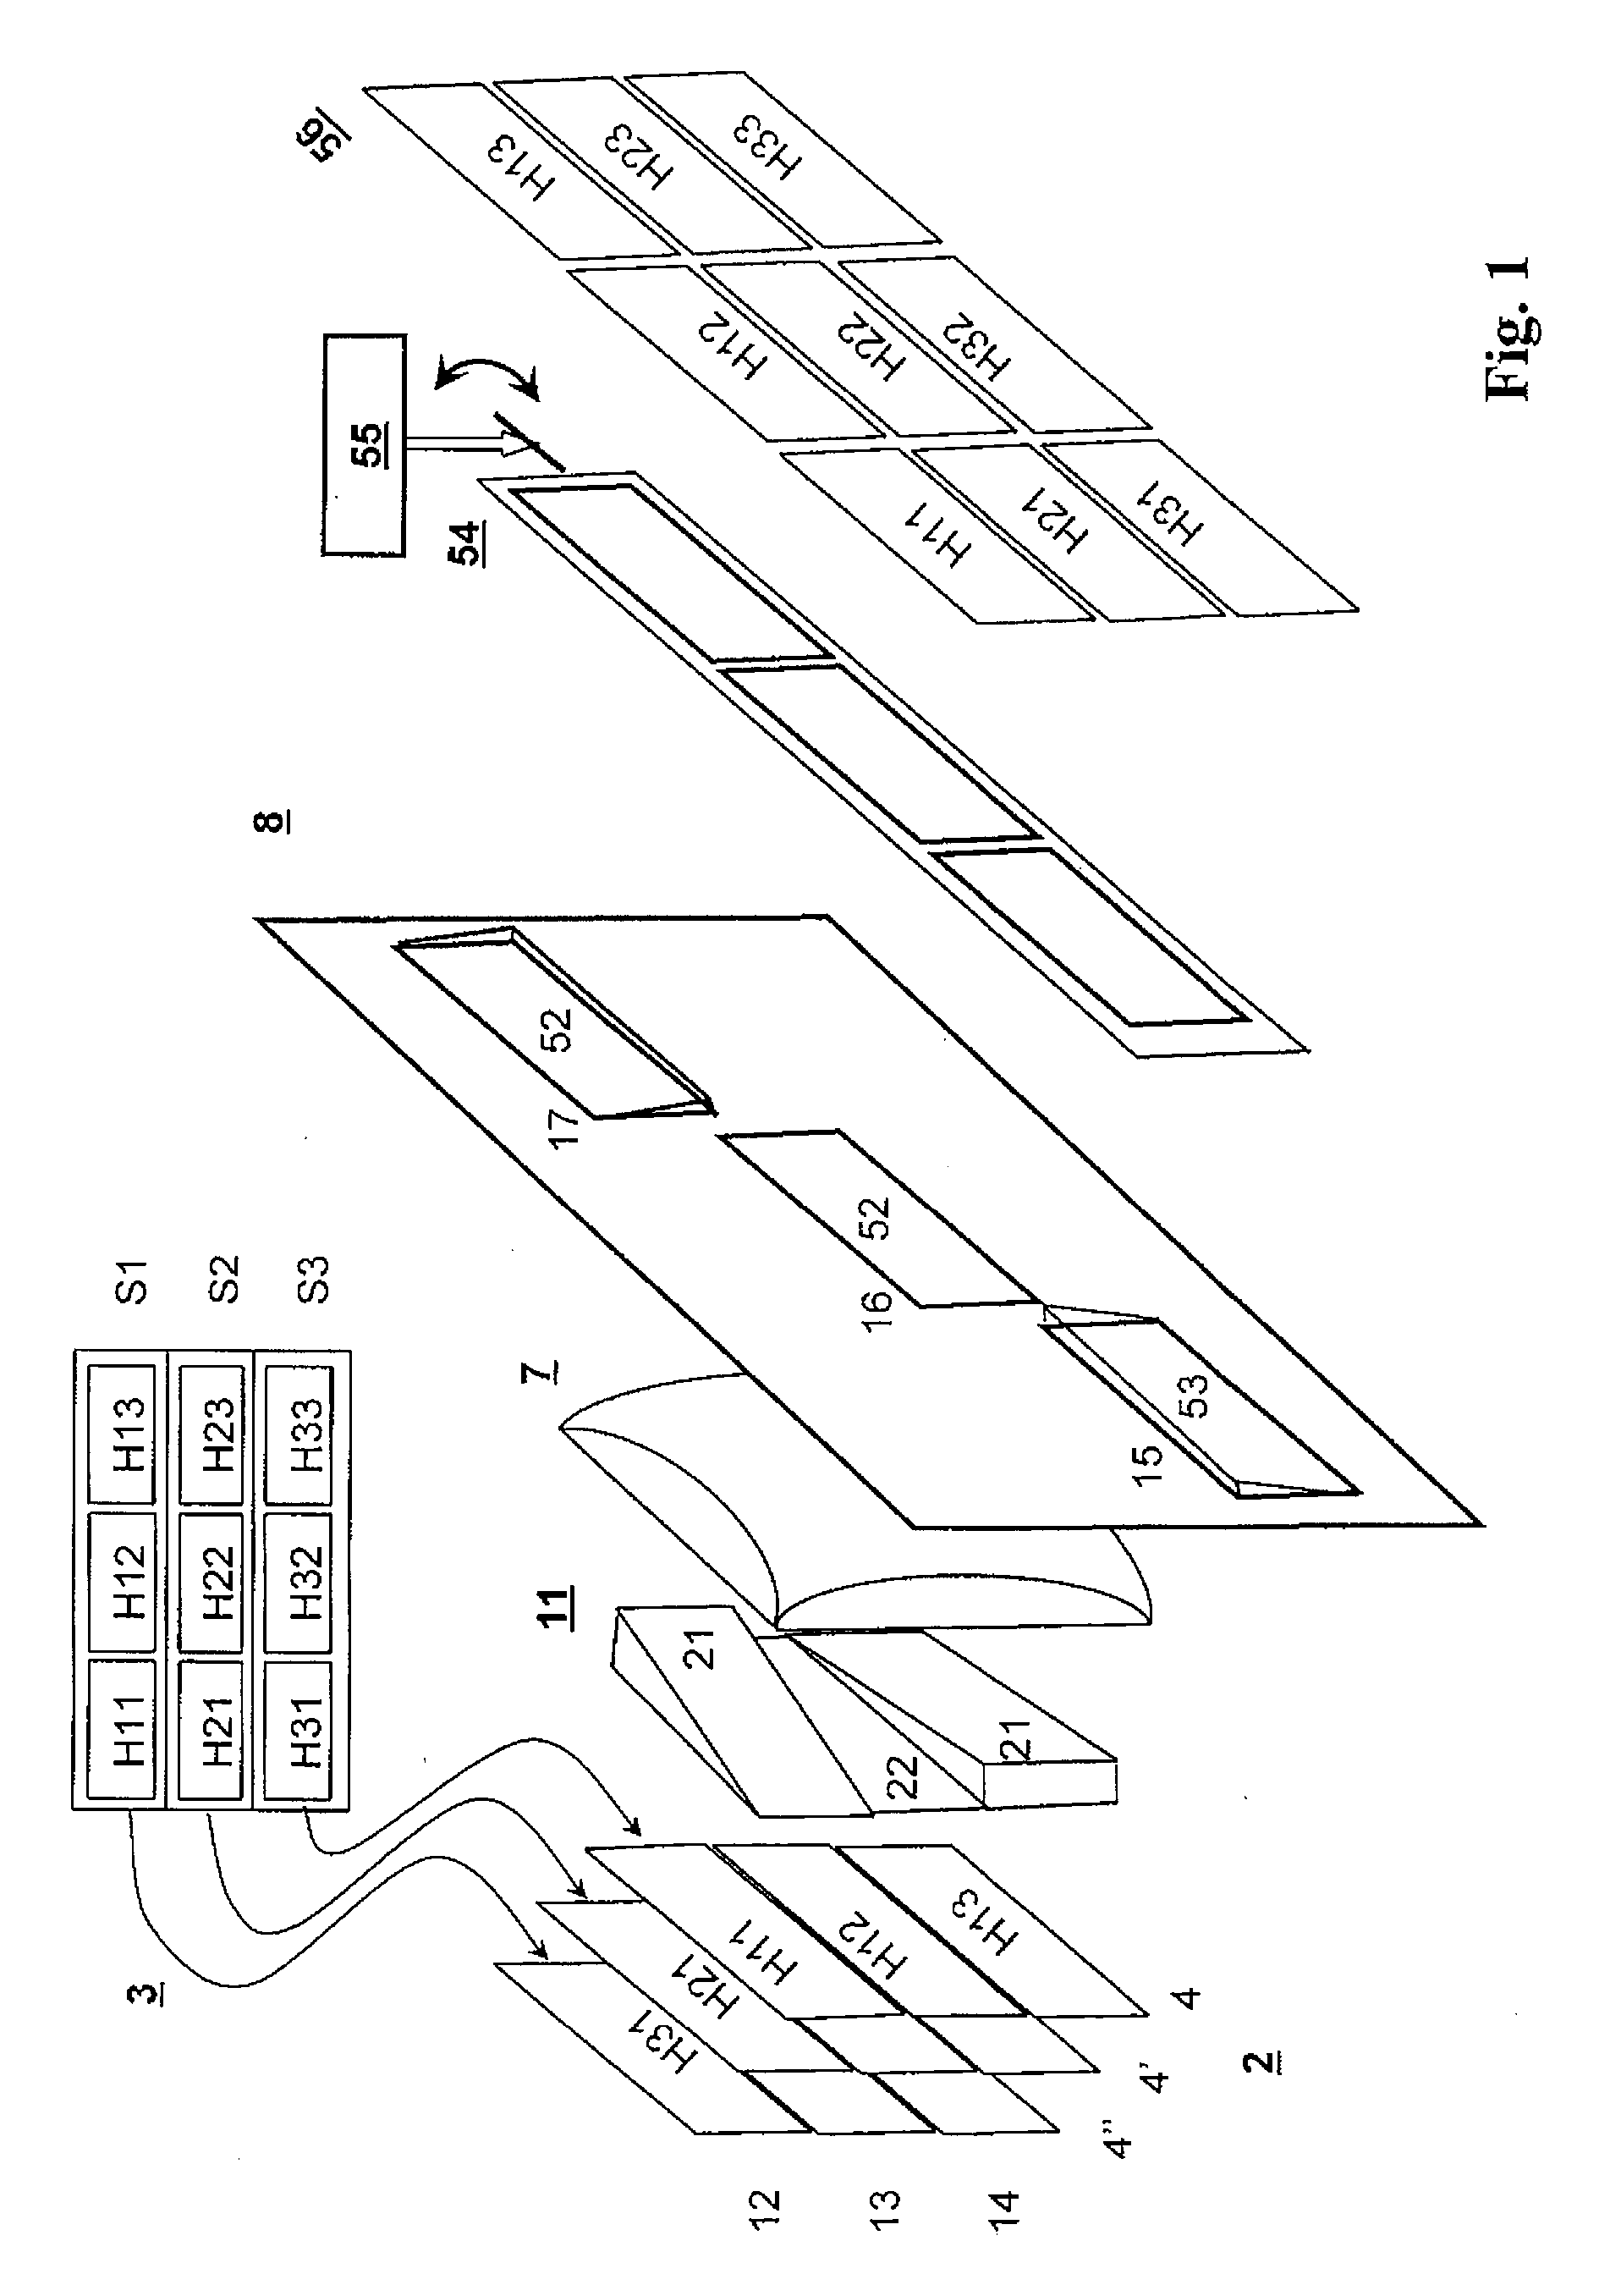 Holographic Reconstruction System Having an Enlarged Visibility Region